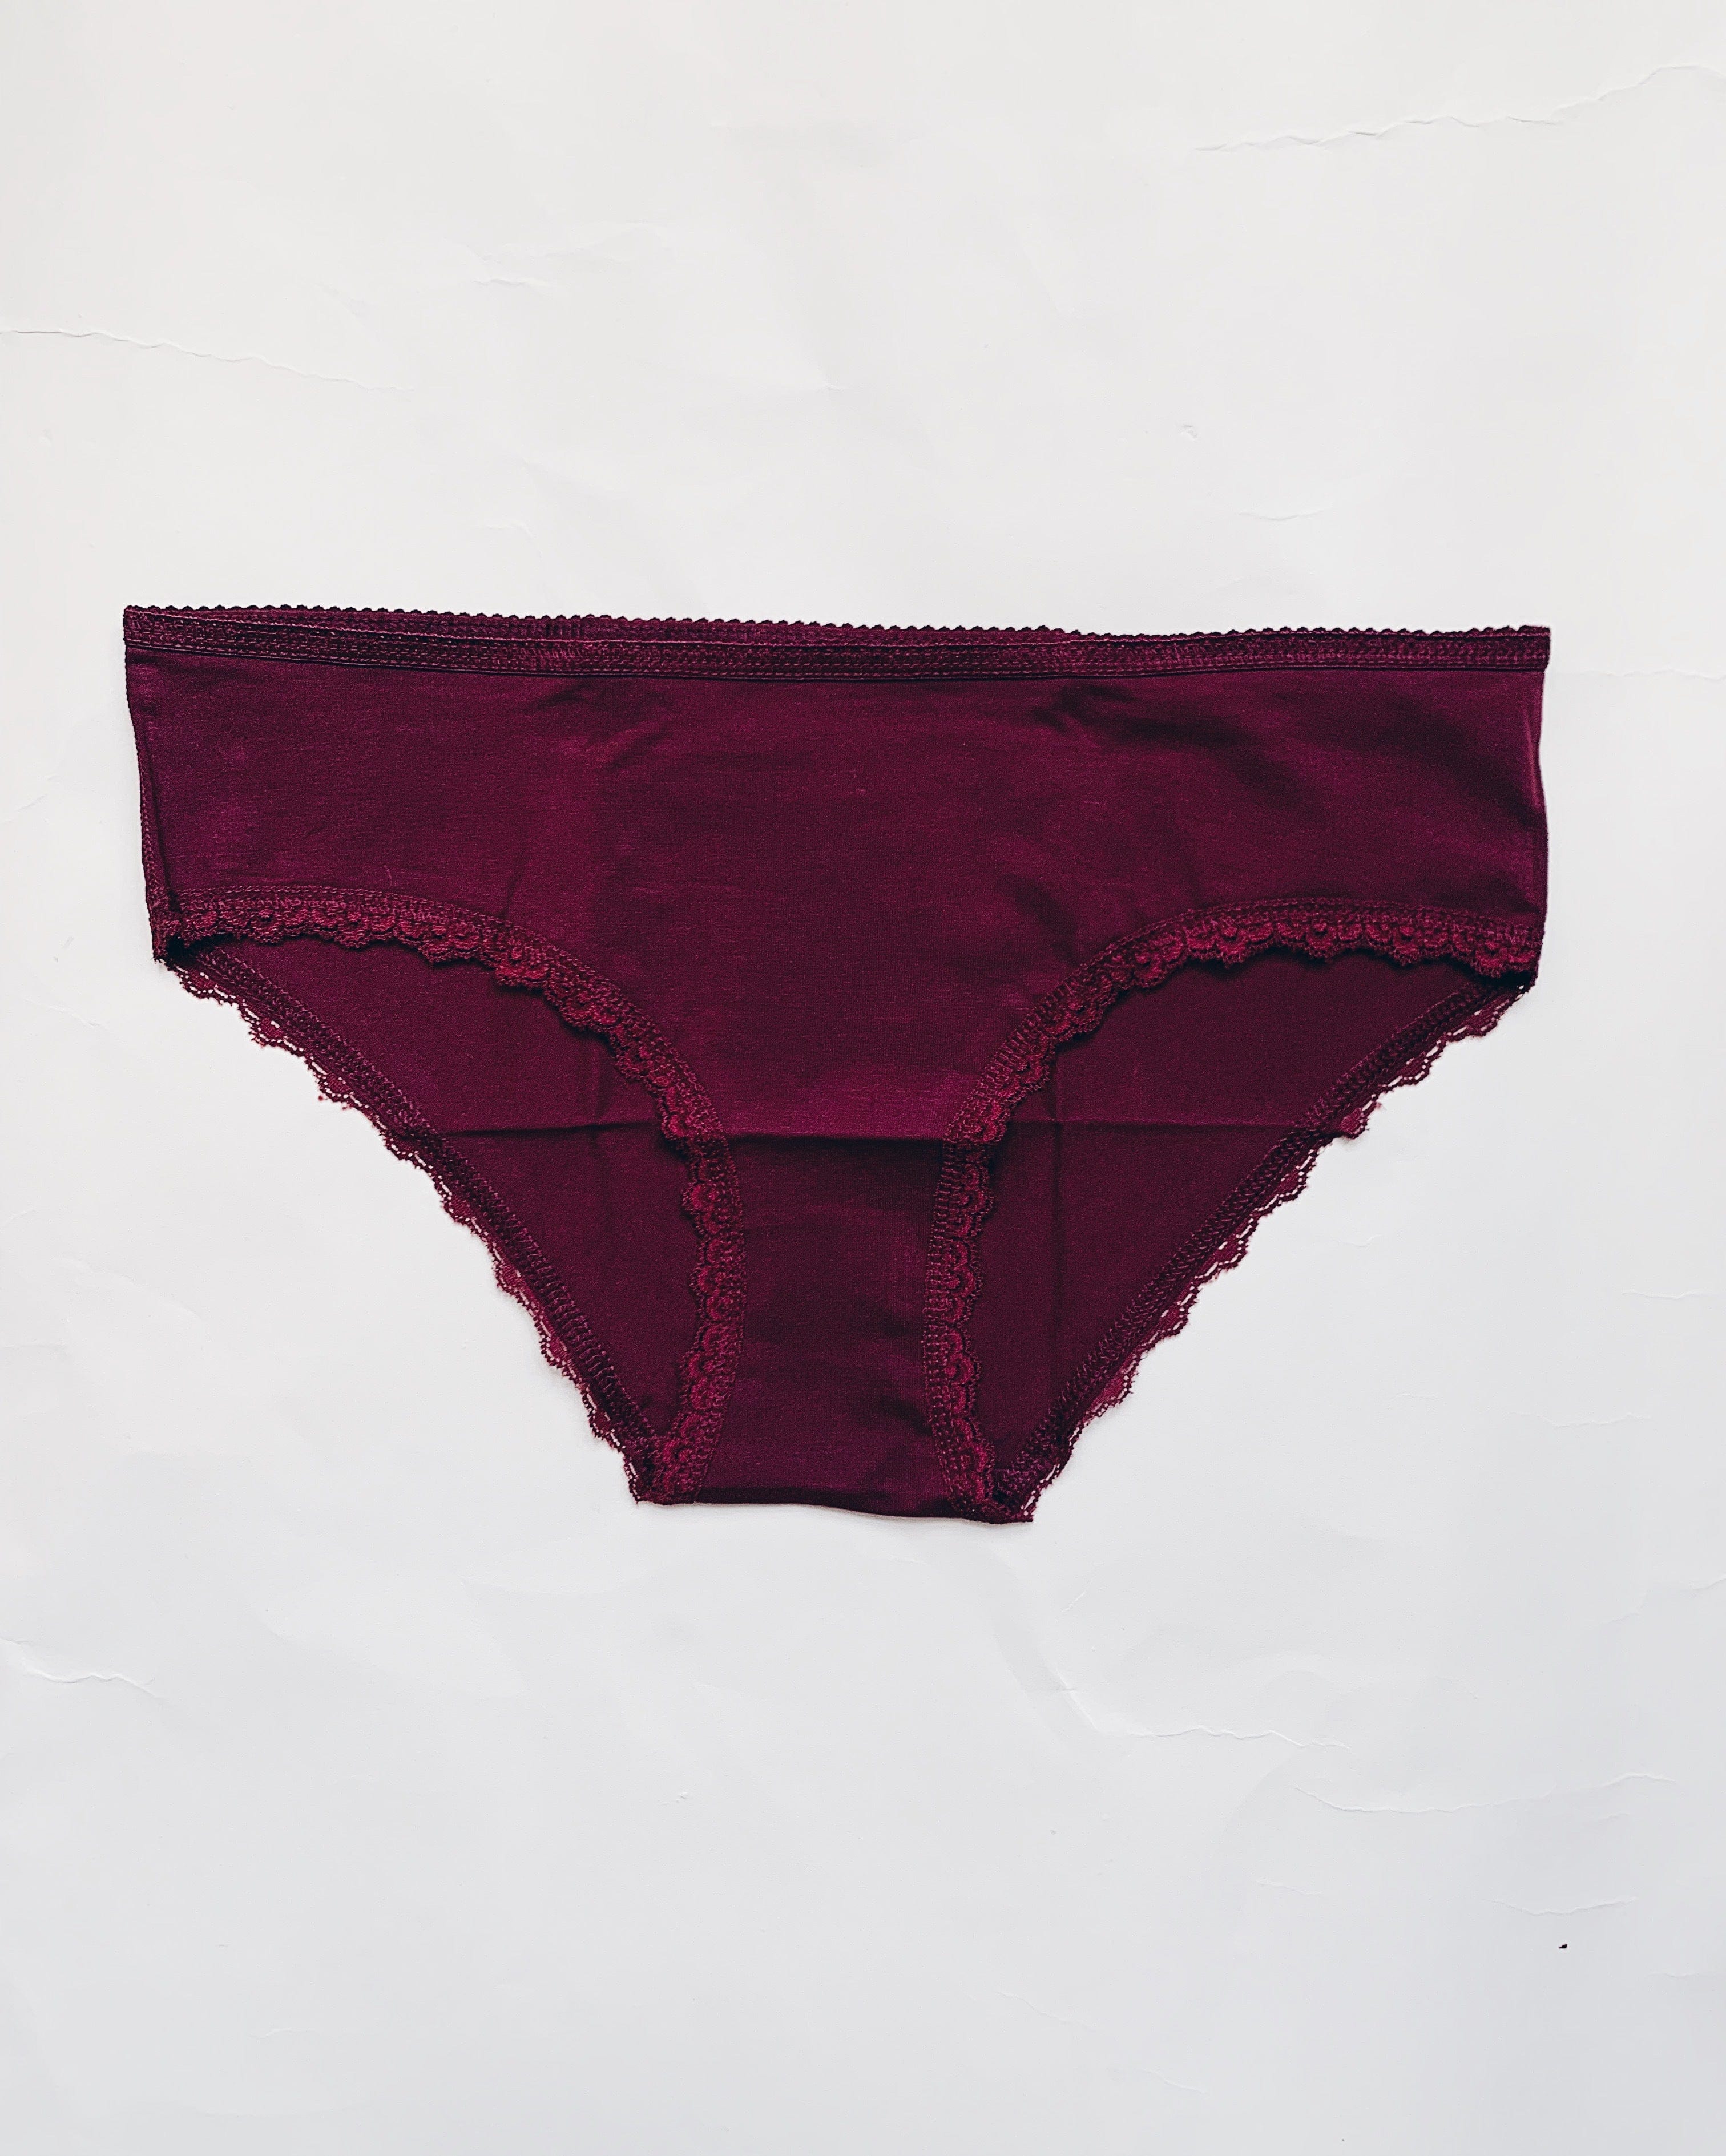 People Tree Underwear Burgundy Lace Hipster